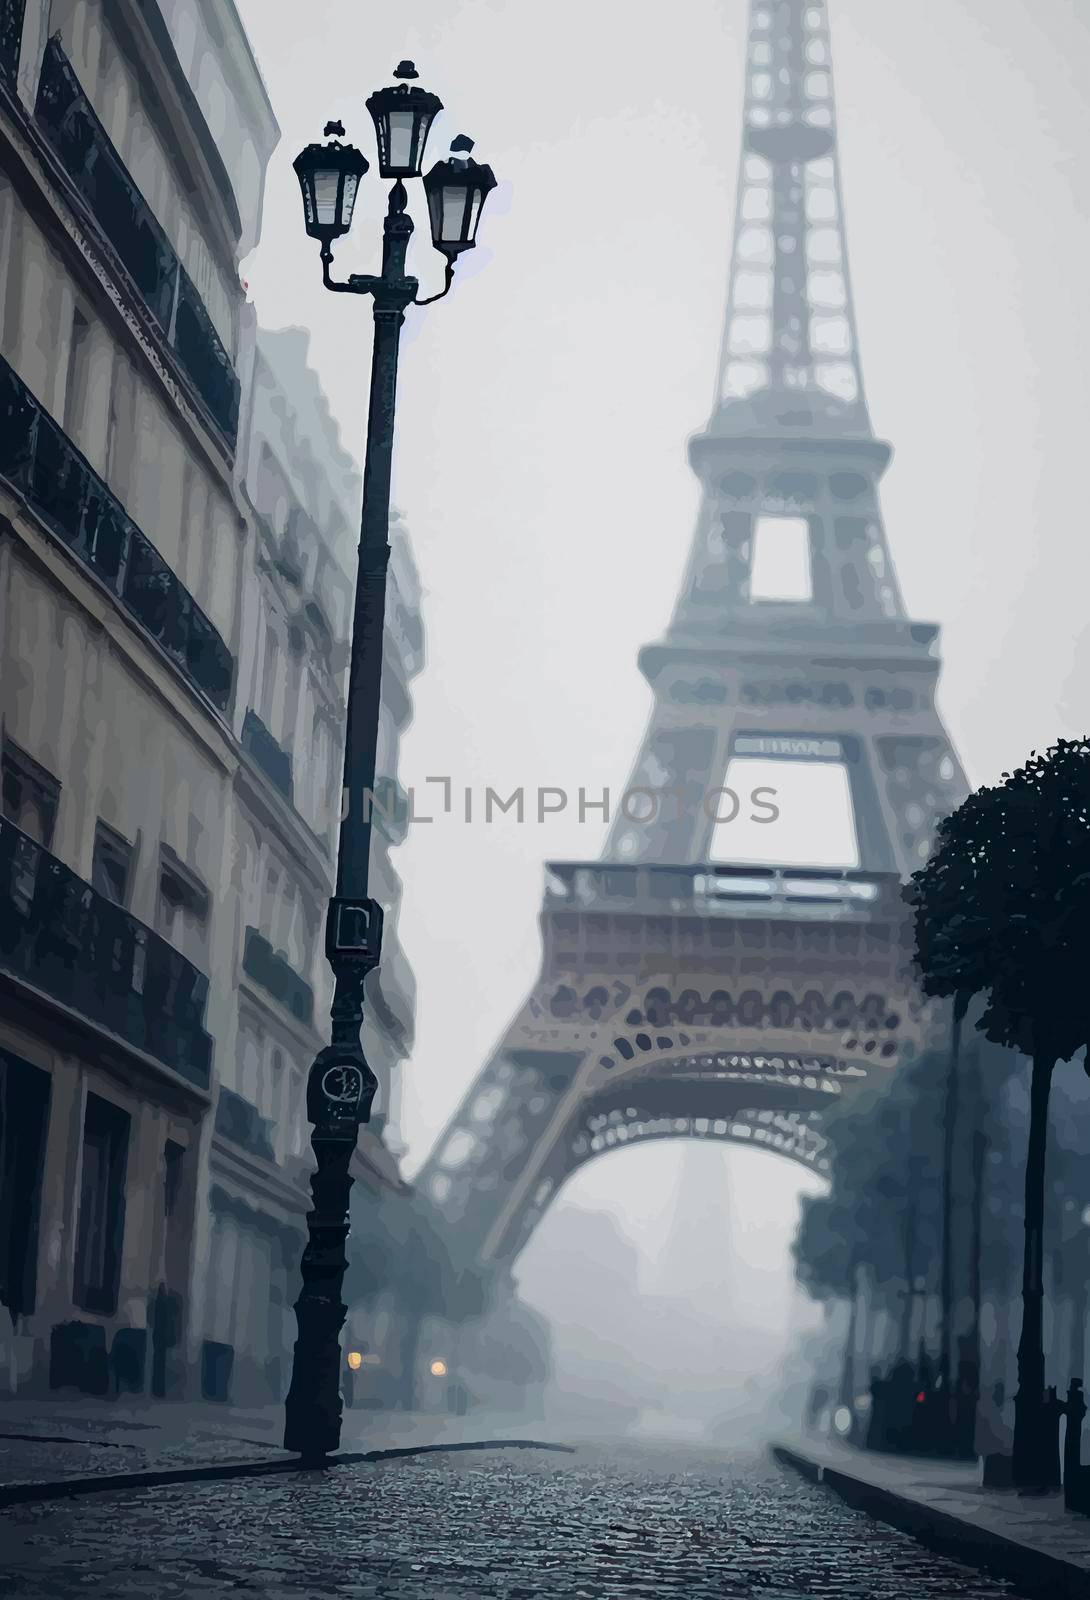 view of paris street with the Eiffel Tower in the background in a foggy day by JpRamos